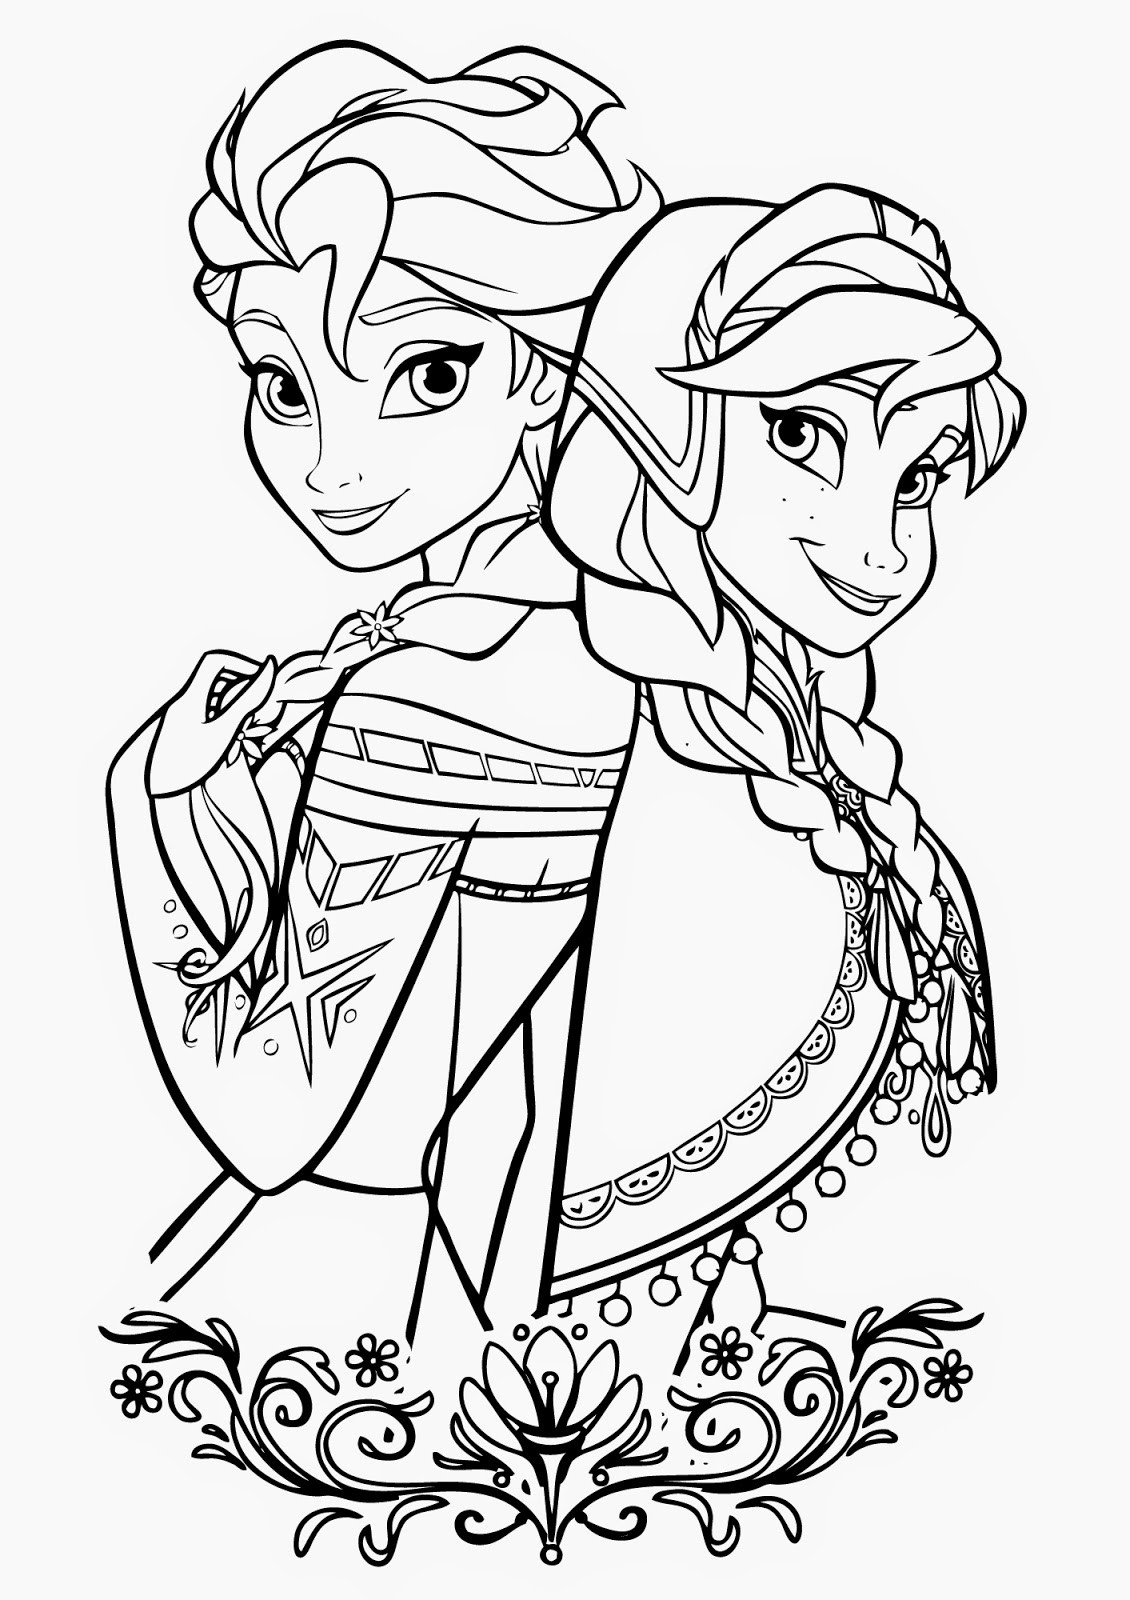 Disney Printable Coloring Pages
 15 Beautiful Disney Frozen Coloring Pages Free Instant